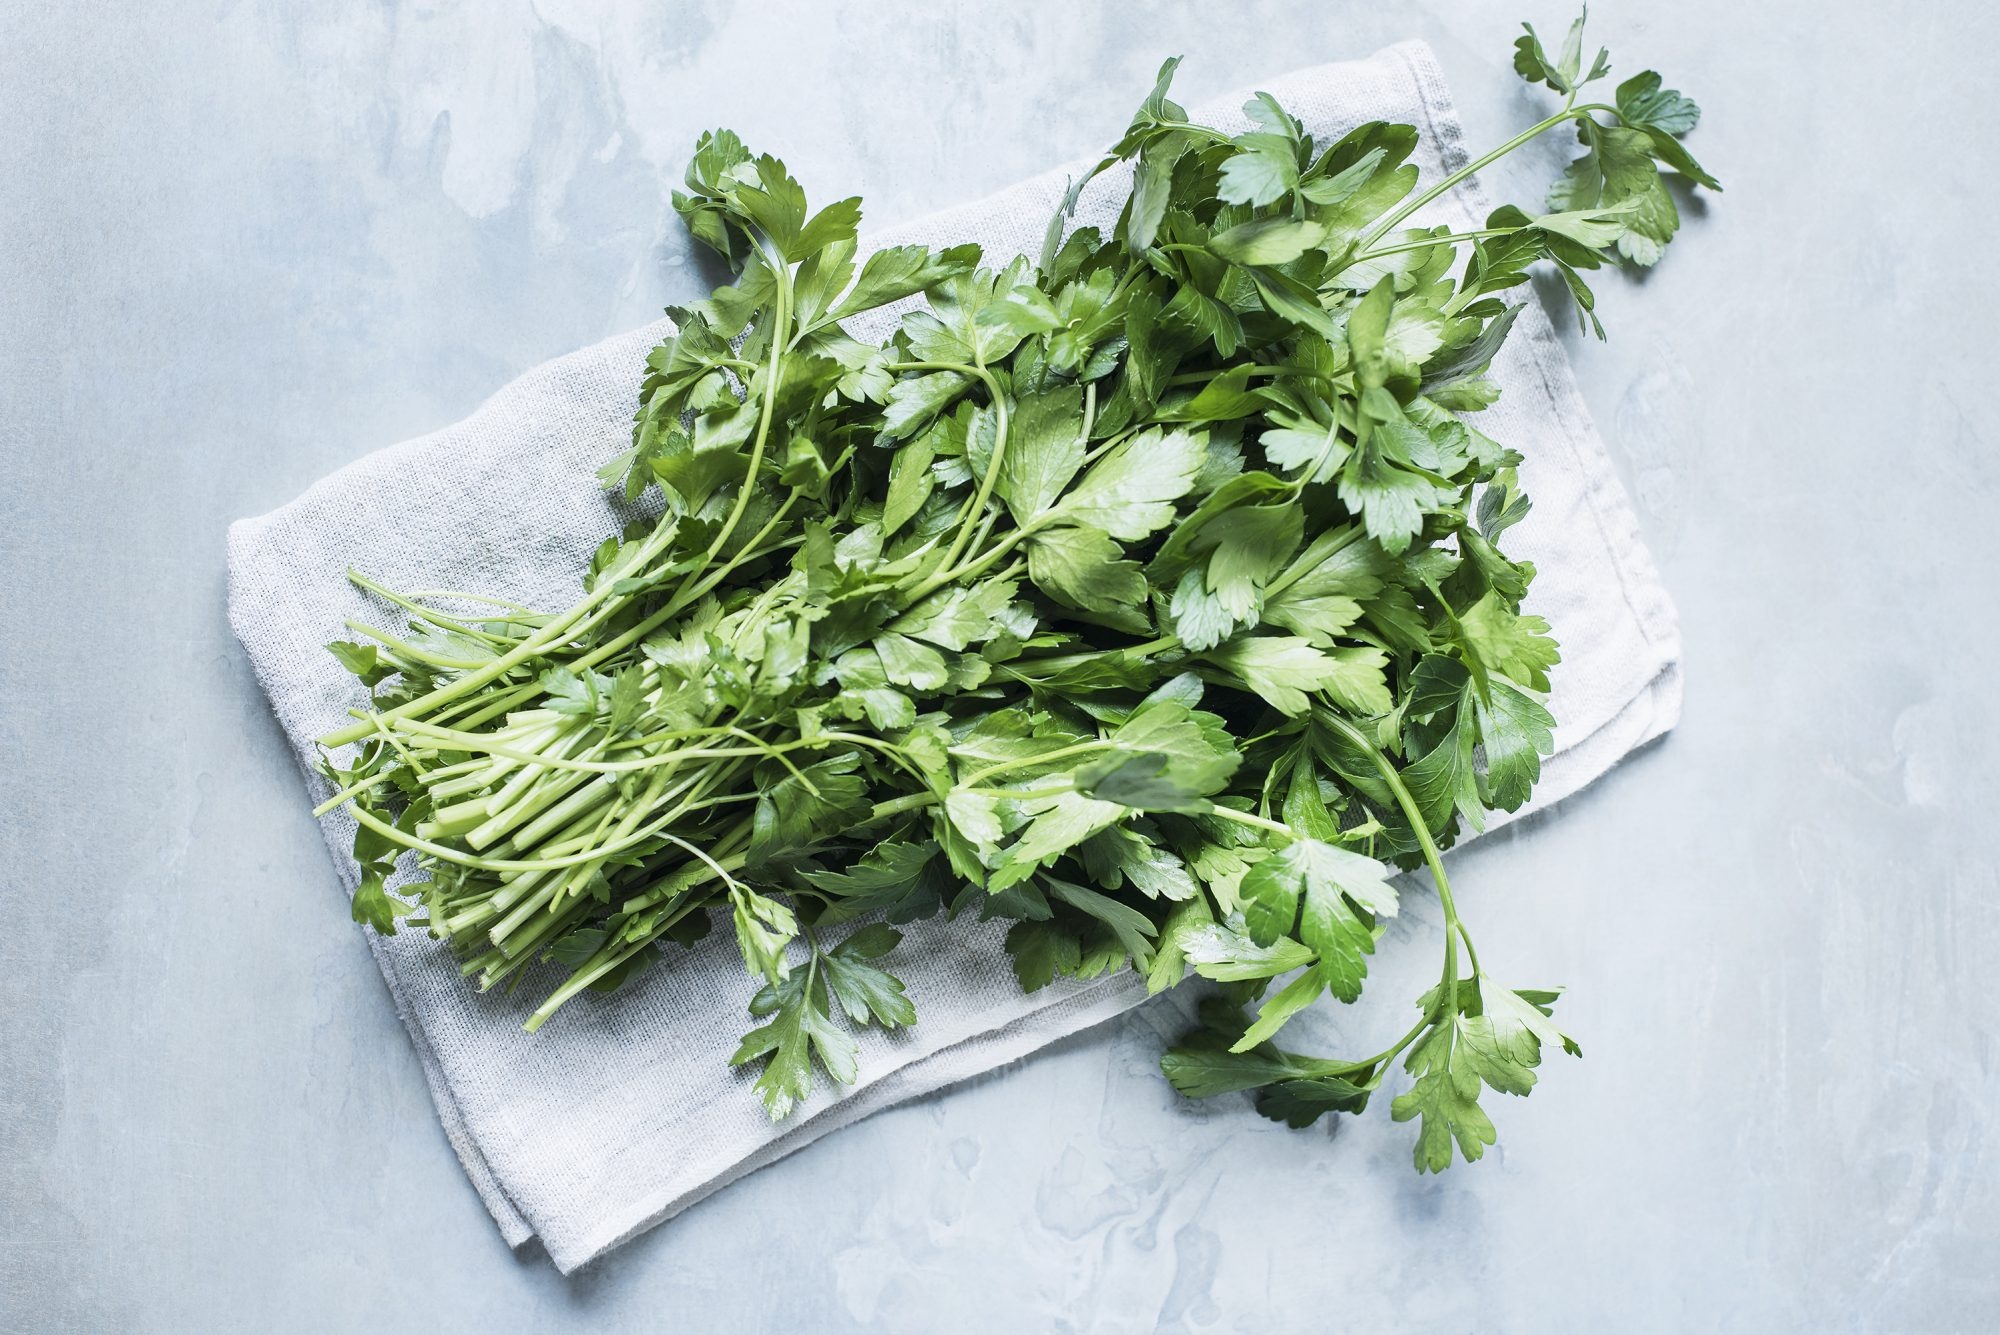 Cilantro substitutes, Alternative herbs, Culinary preferences, Ingredient replacement, 2000x1340 HD Desktop